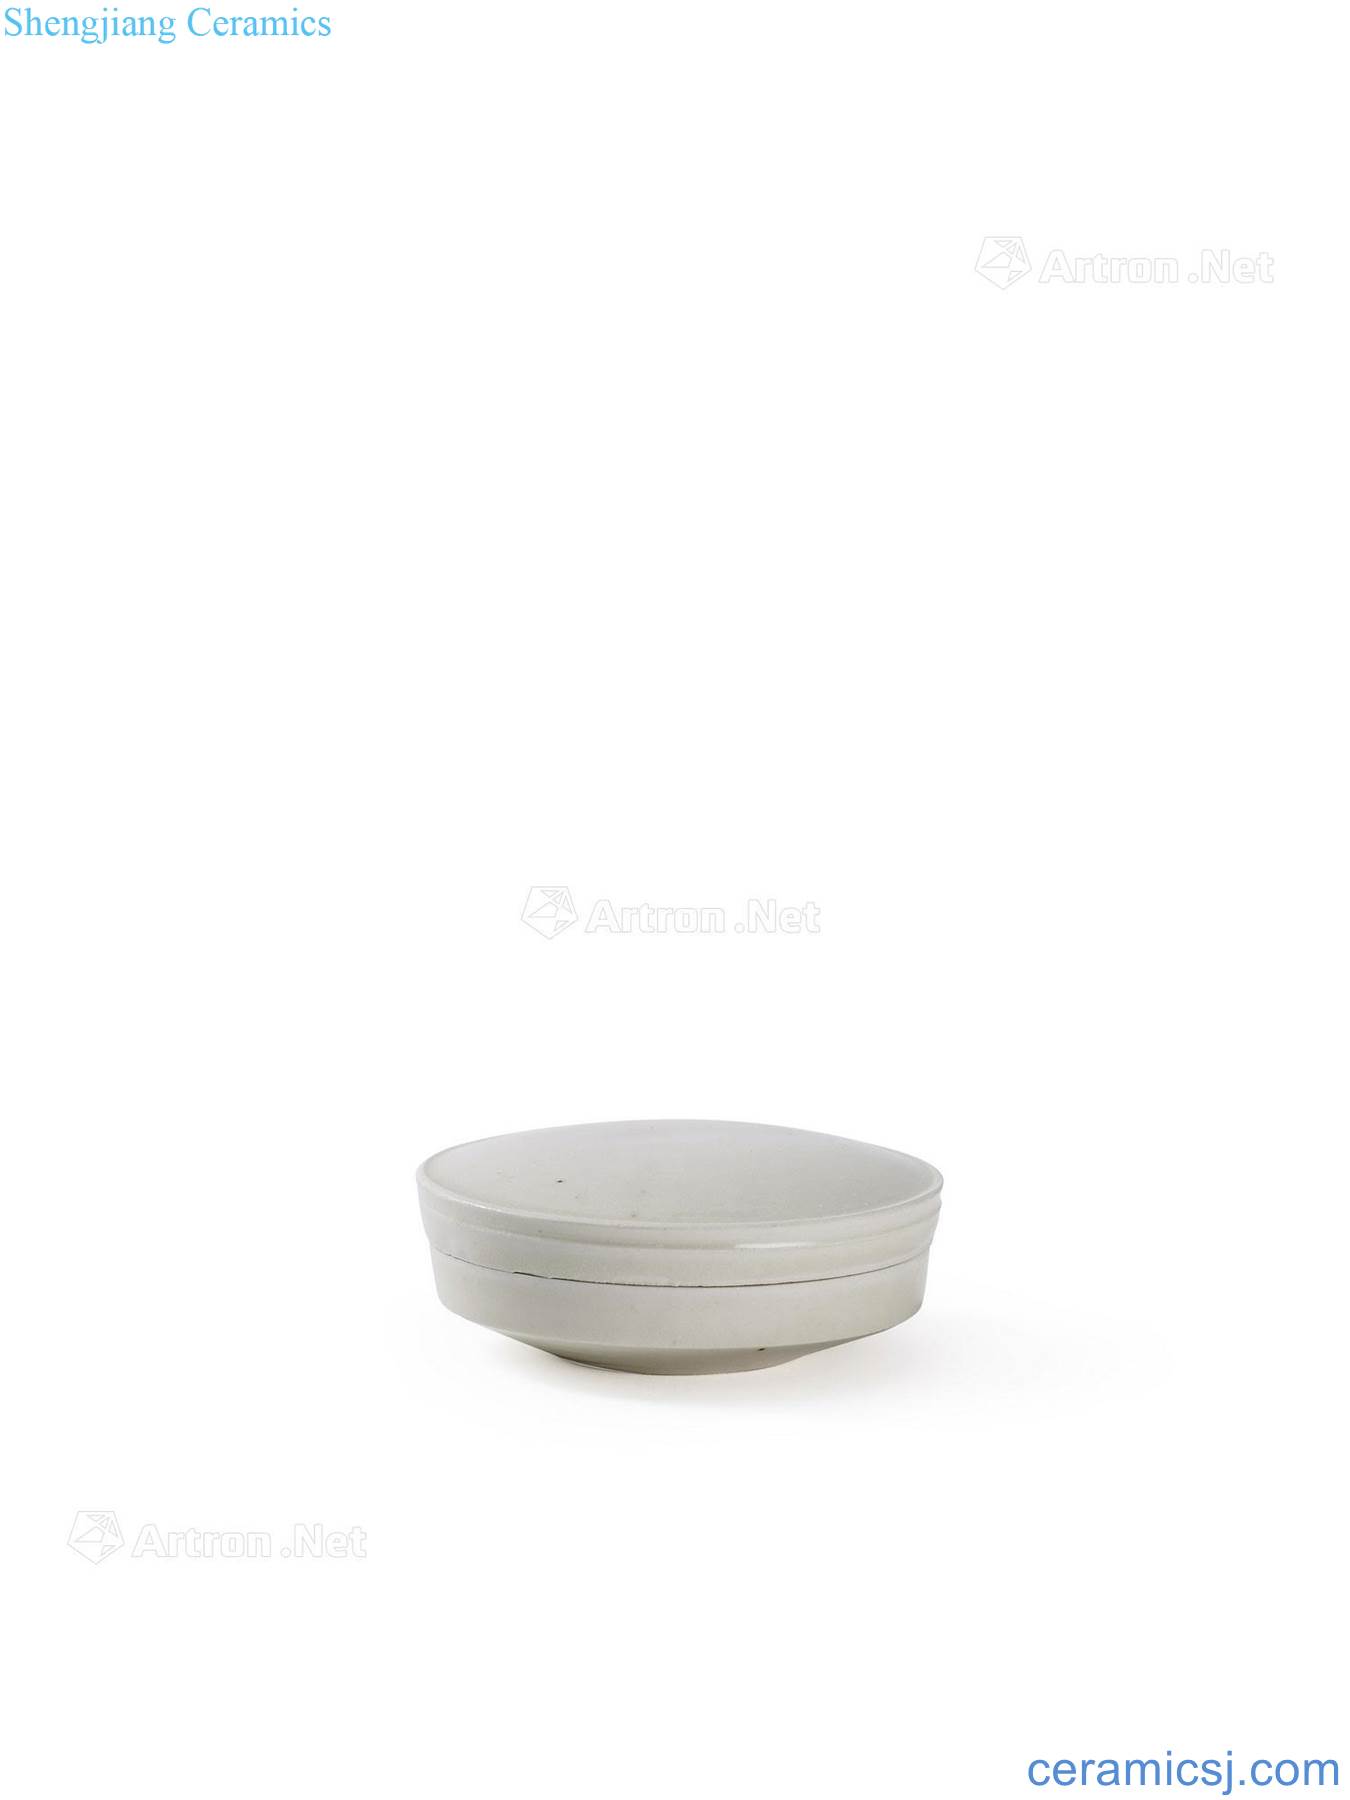 Five generations - northern song dynasty kiln white glaze powder compact